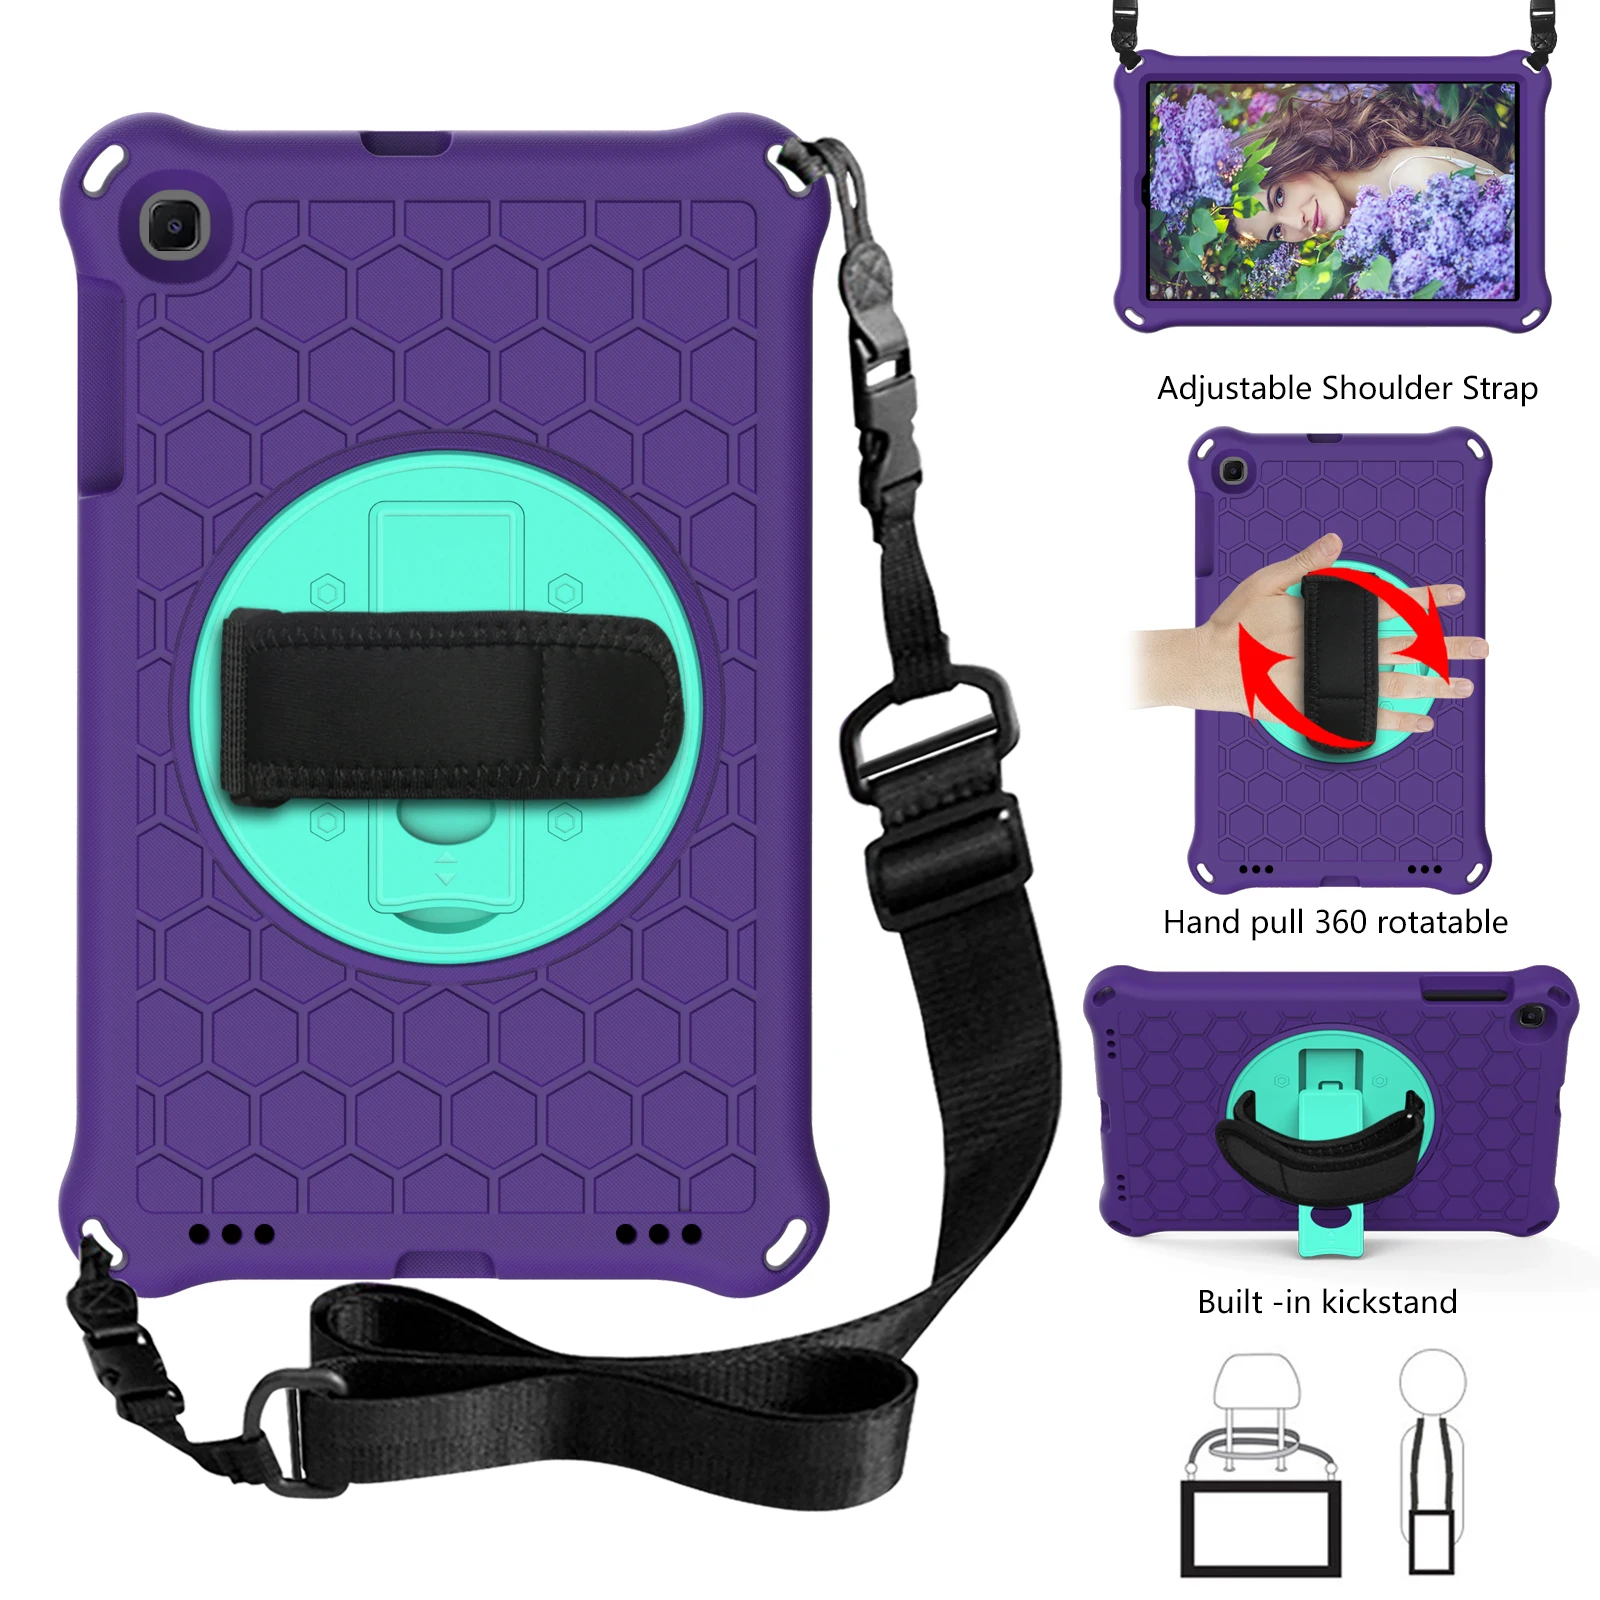 

Case For Samsung Galaxy Tab A 10.1 2019 T510 T515 SM-T510 SM-T515 Cover Hand Strap & Kickstand Shockproof Kids Tablets funda